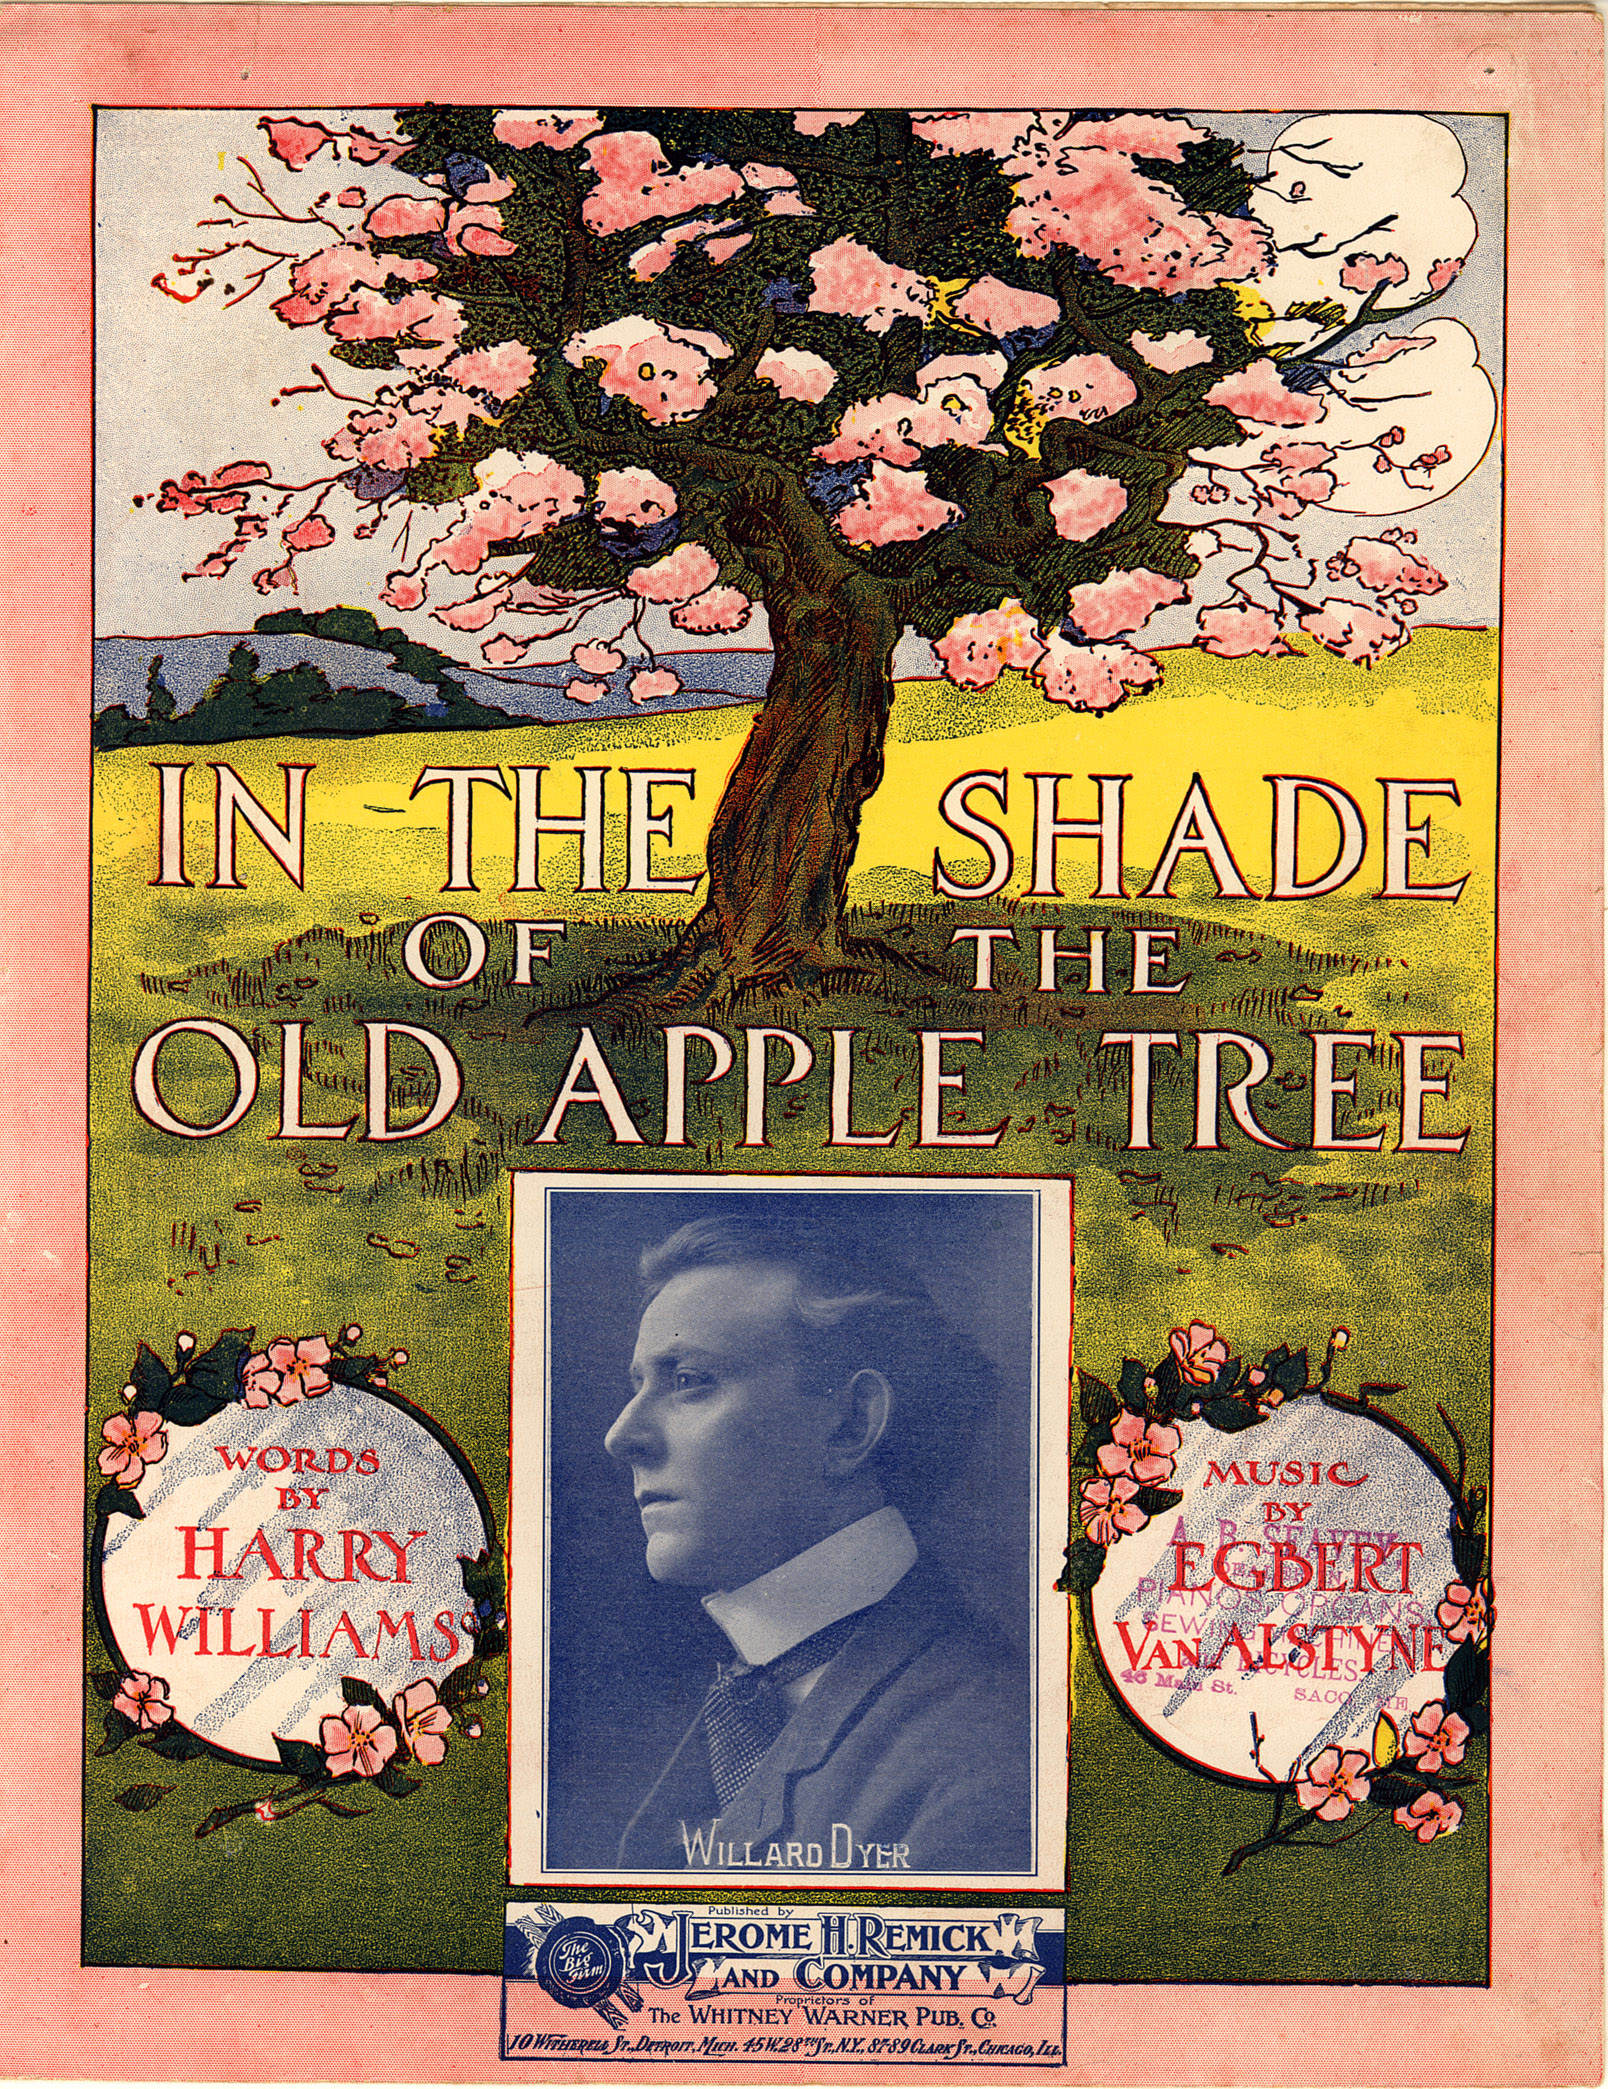 150dpi JPEG image of: In the shade of the old apple tree